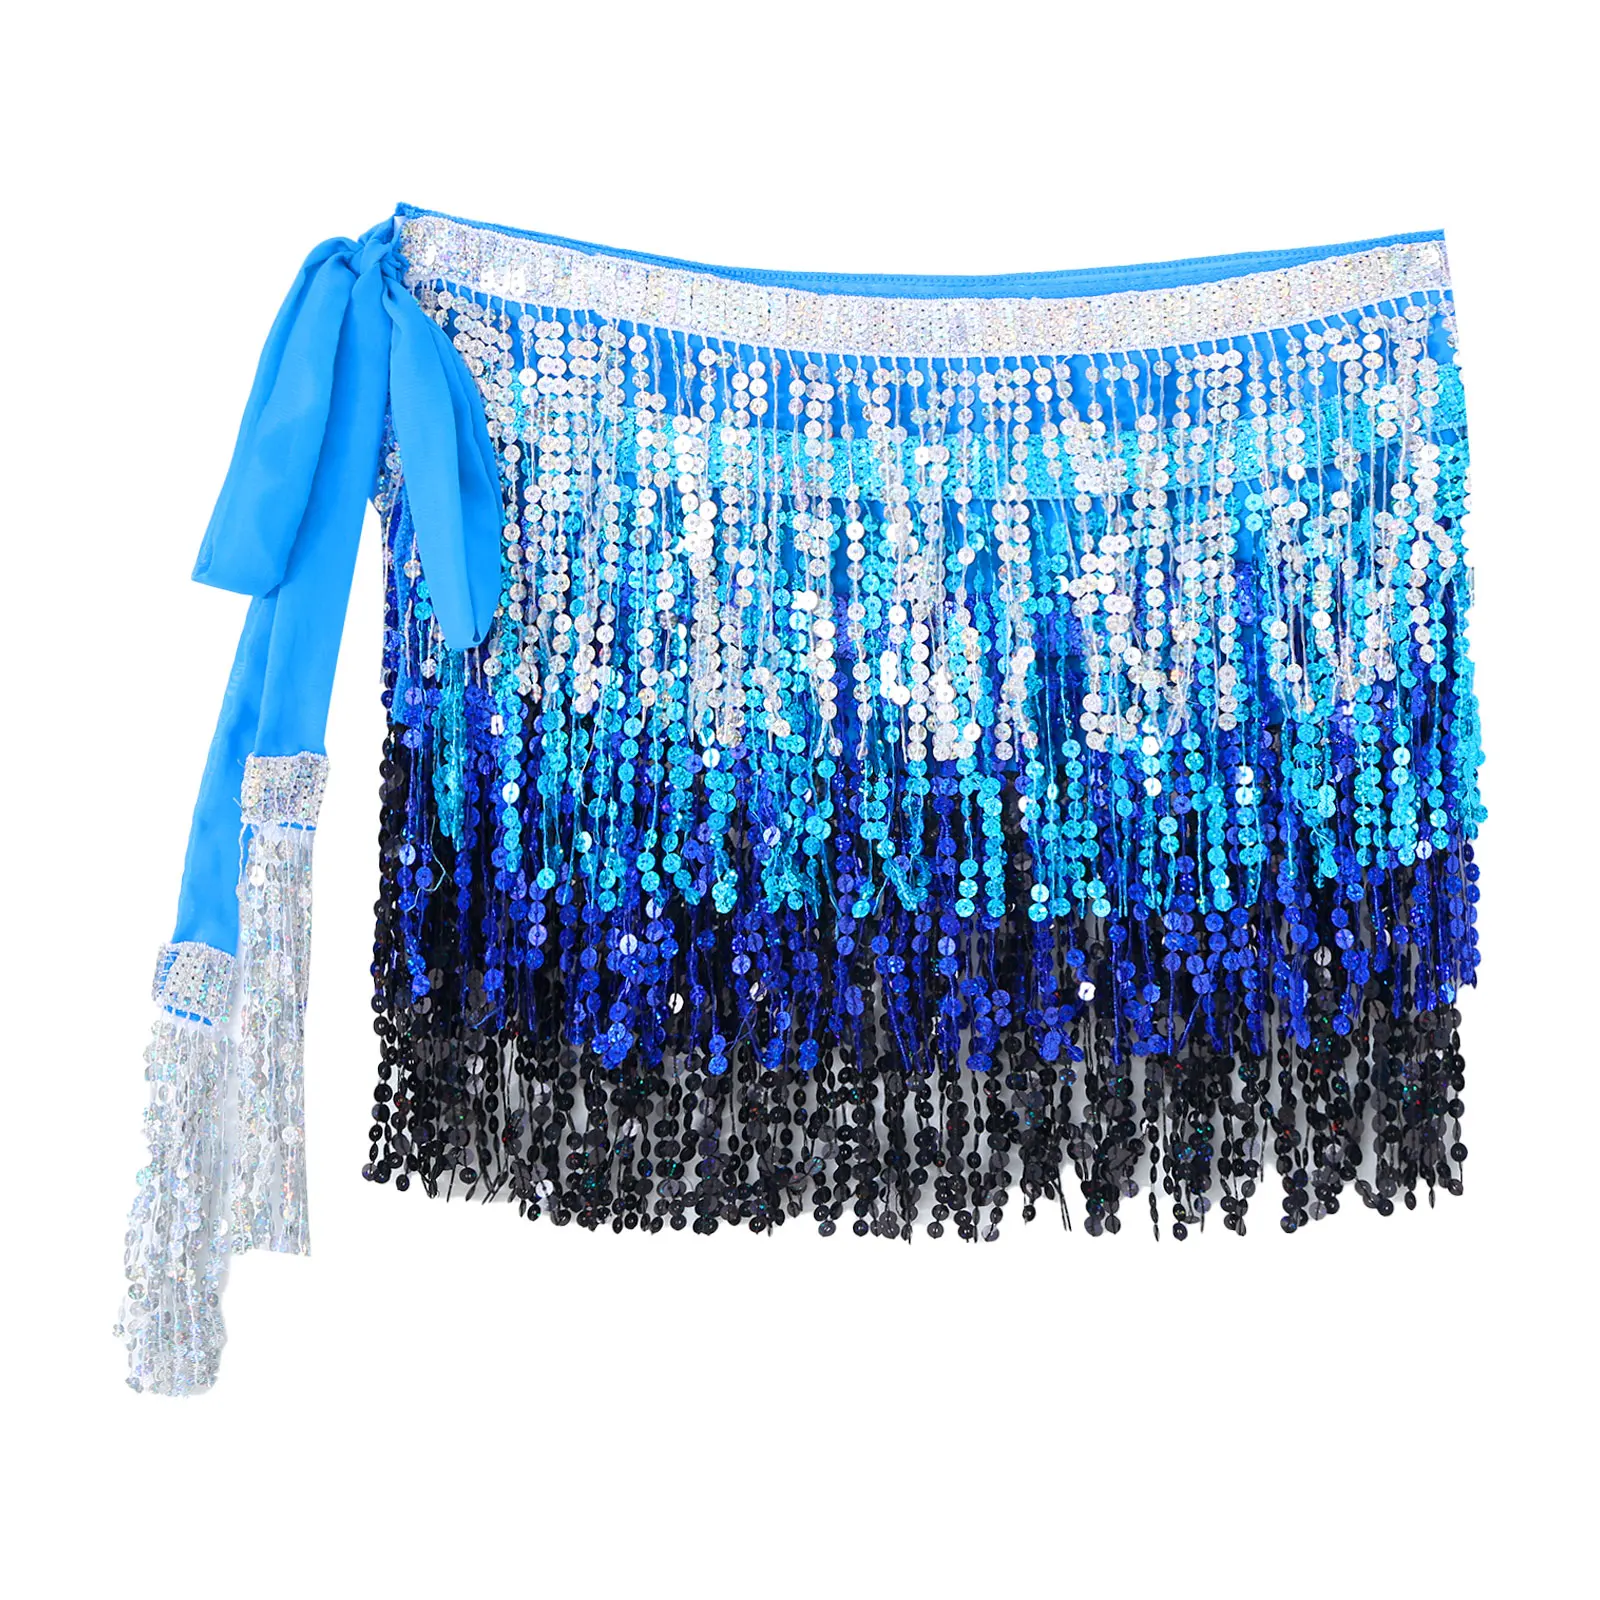 

Women Belly Dance Sparkly Sequin Tassel Skirt Nightclub Stage Fringed Hip Scarf Lace-up Miniskirt Show Rave Party Costumes